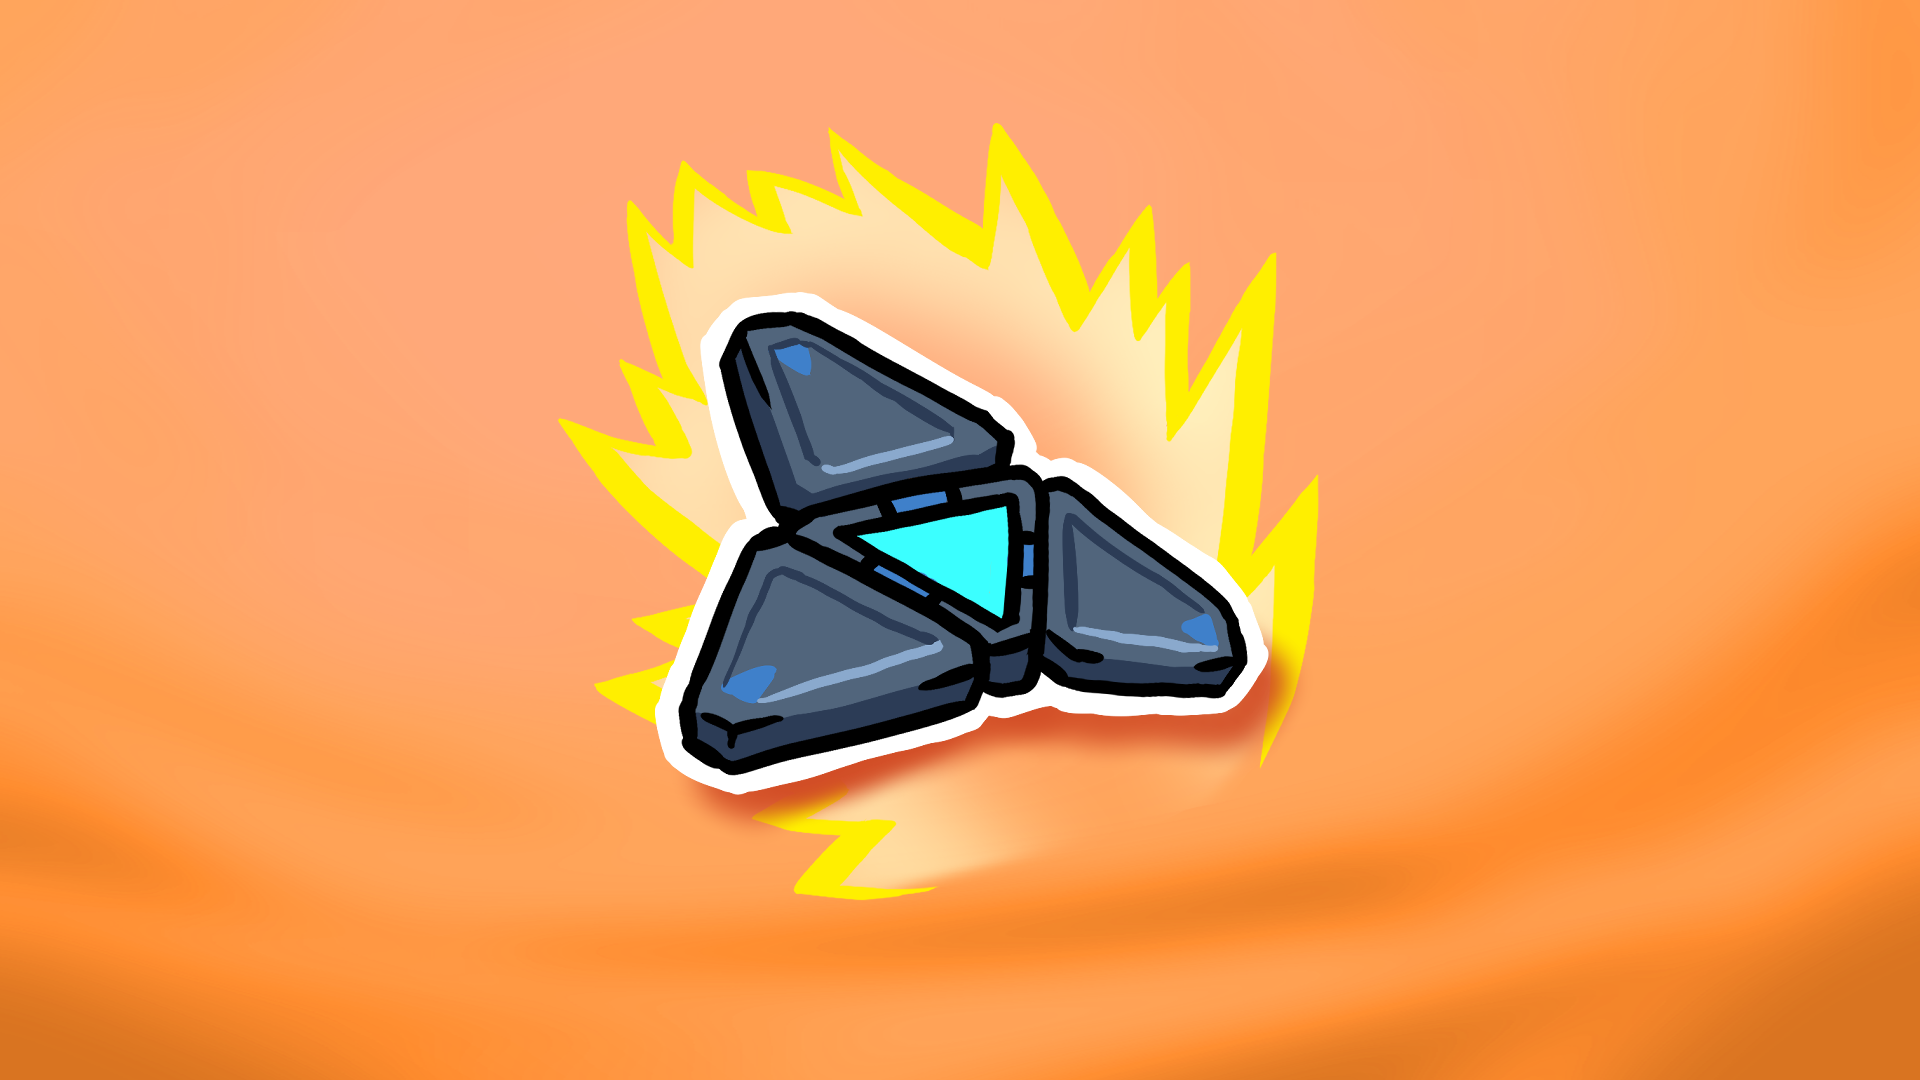 Icon for Shocking!